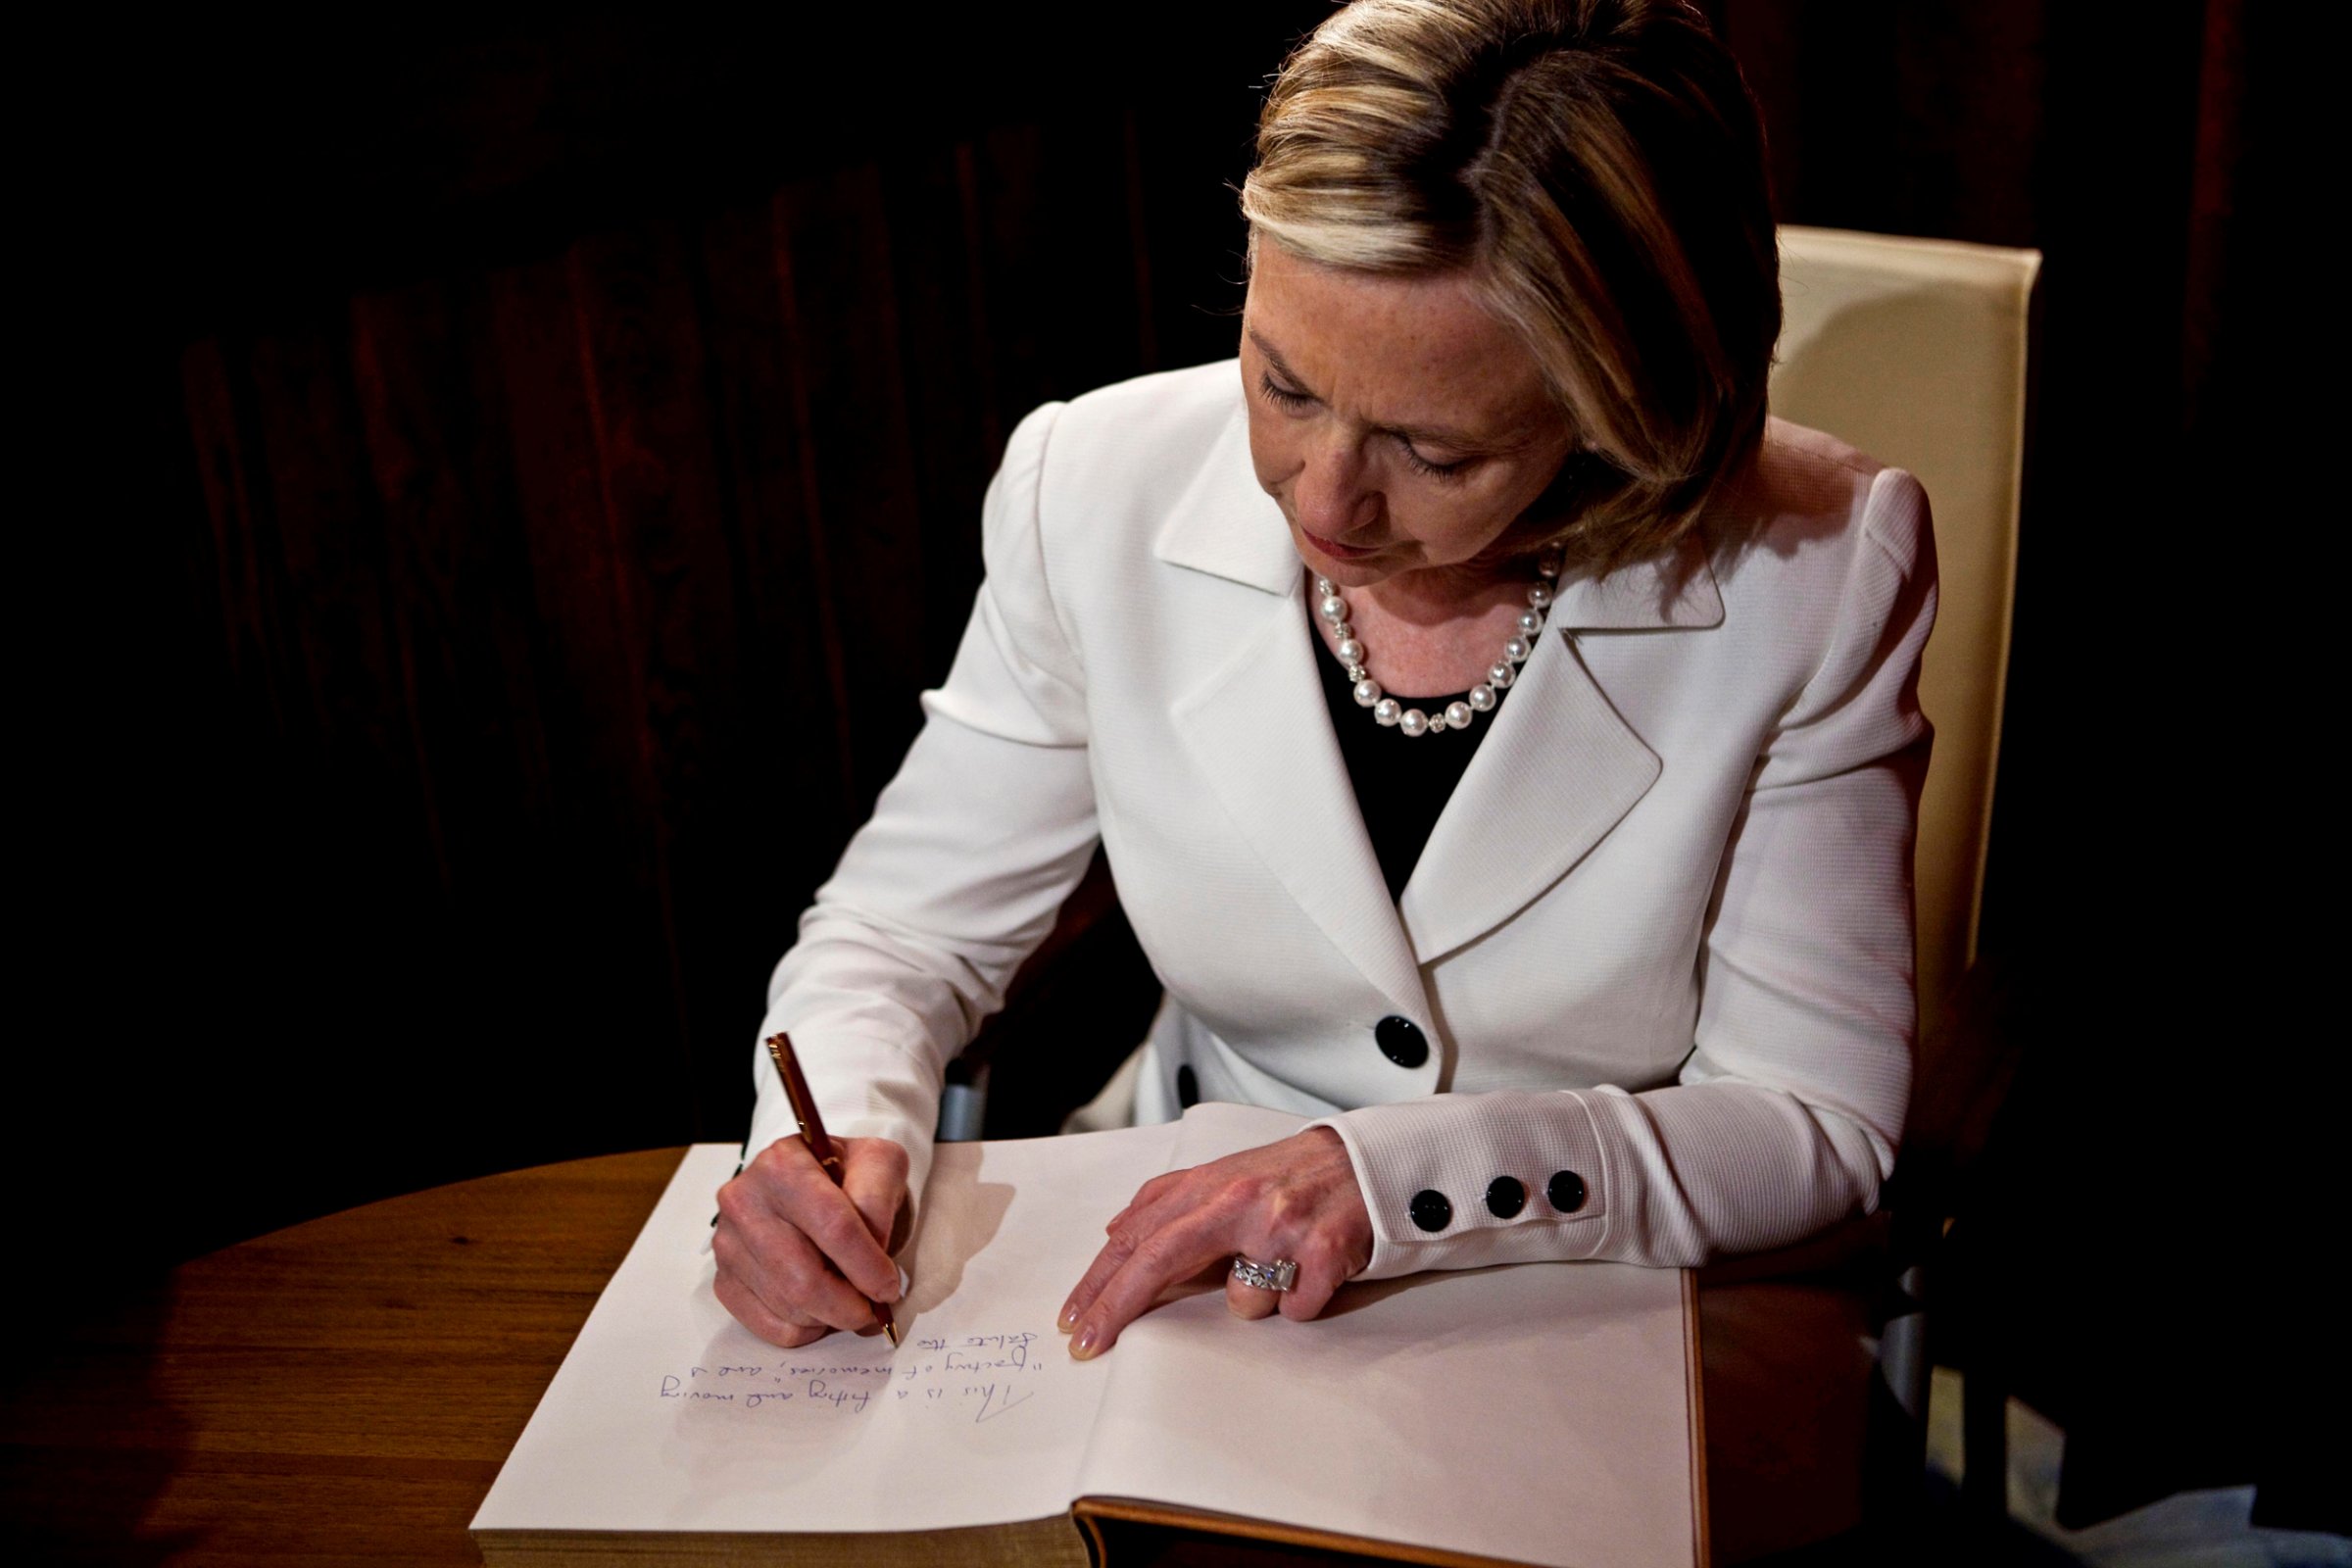 Secretary of State Hillary Rodham Clinton signs the guest book at the Schindler Factory Museum in Krakow, Poland on July 3, 2010.